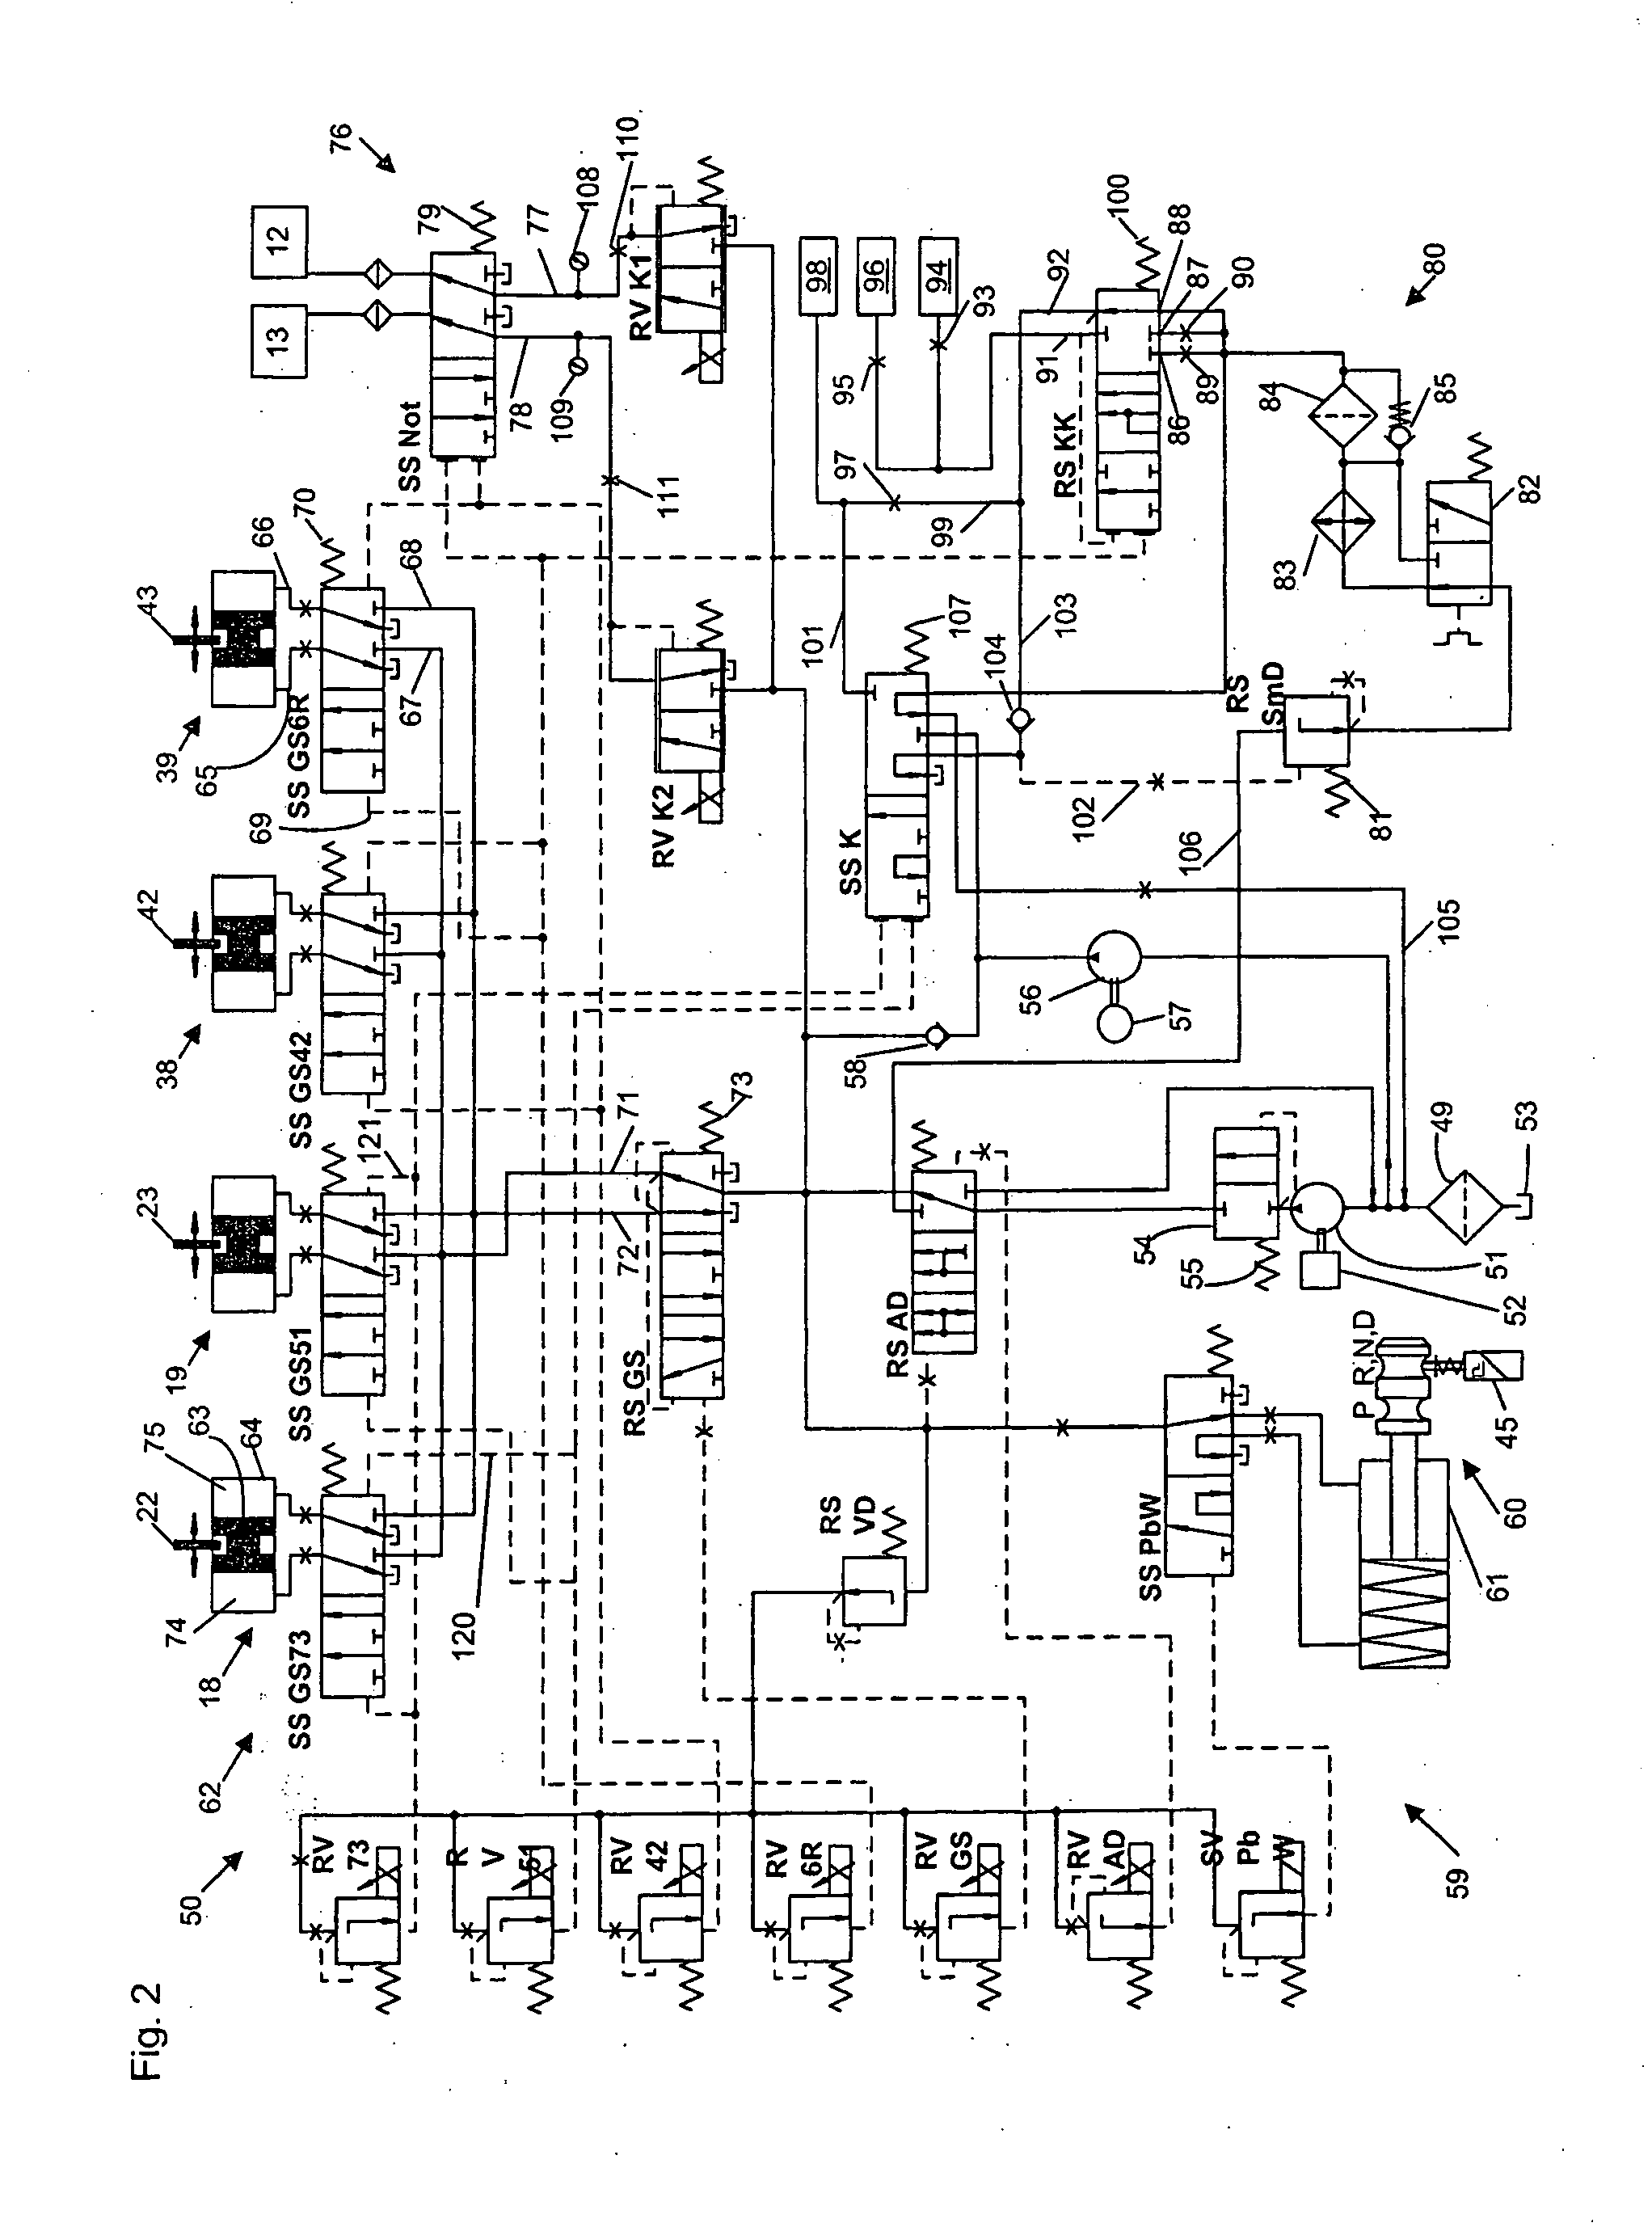 Control device for an automated geared transmission